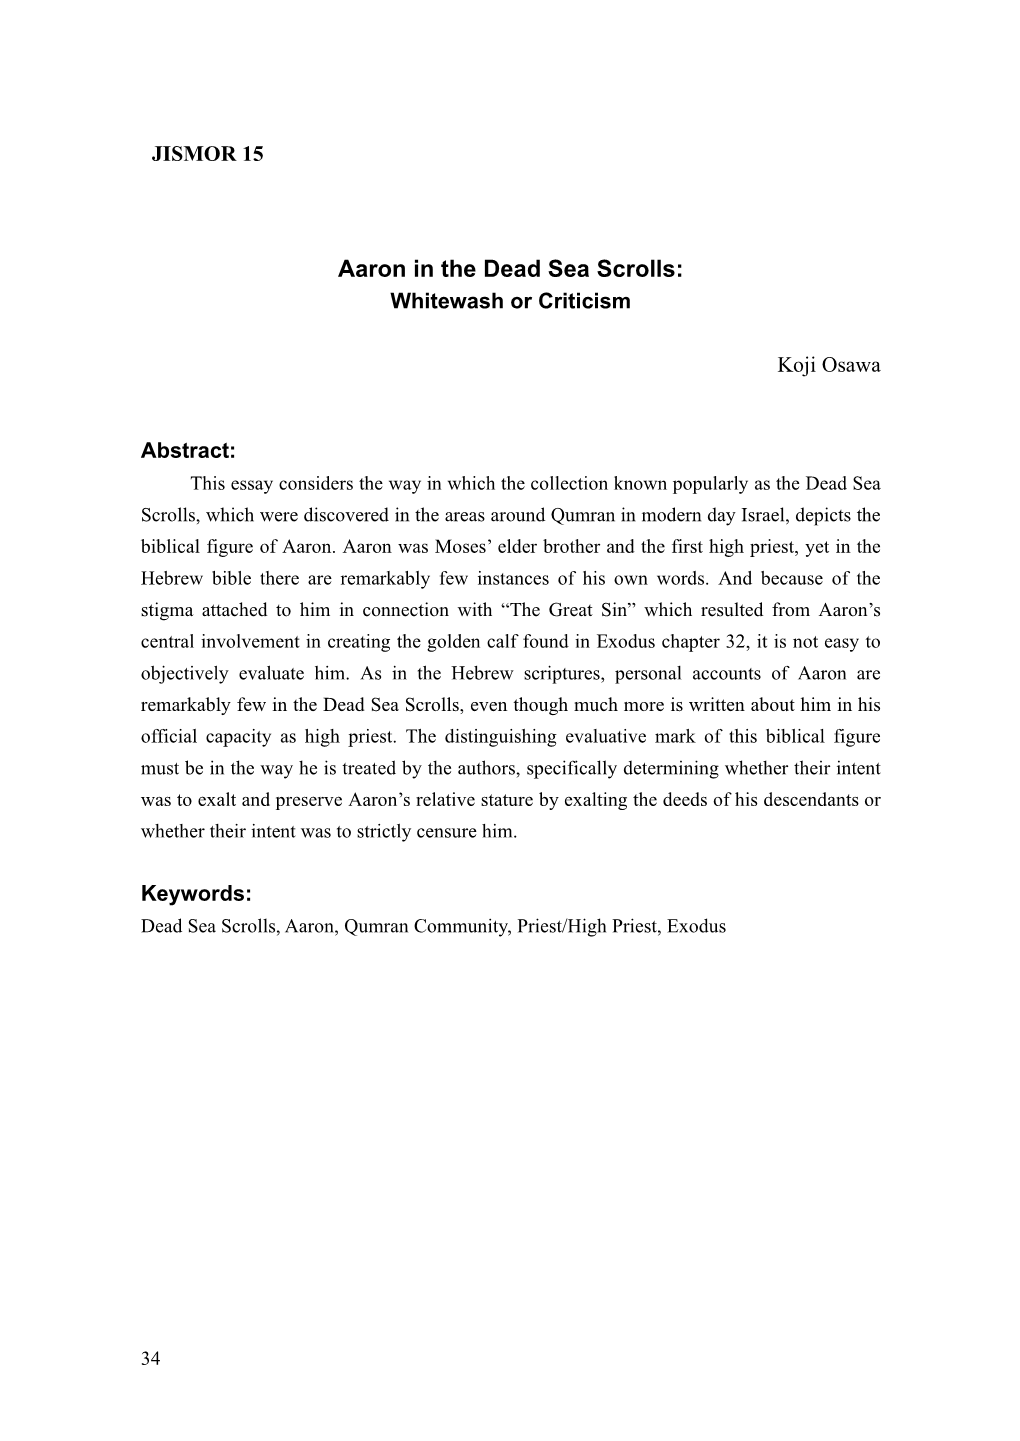 Aaron in the Dead Sea Scrolls: Whitewash Or Criticism